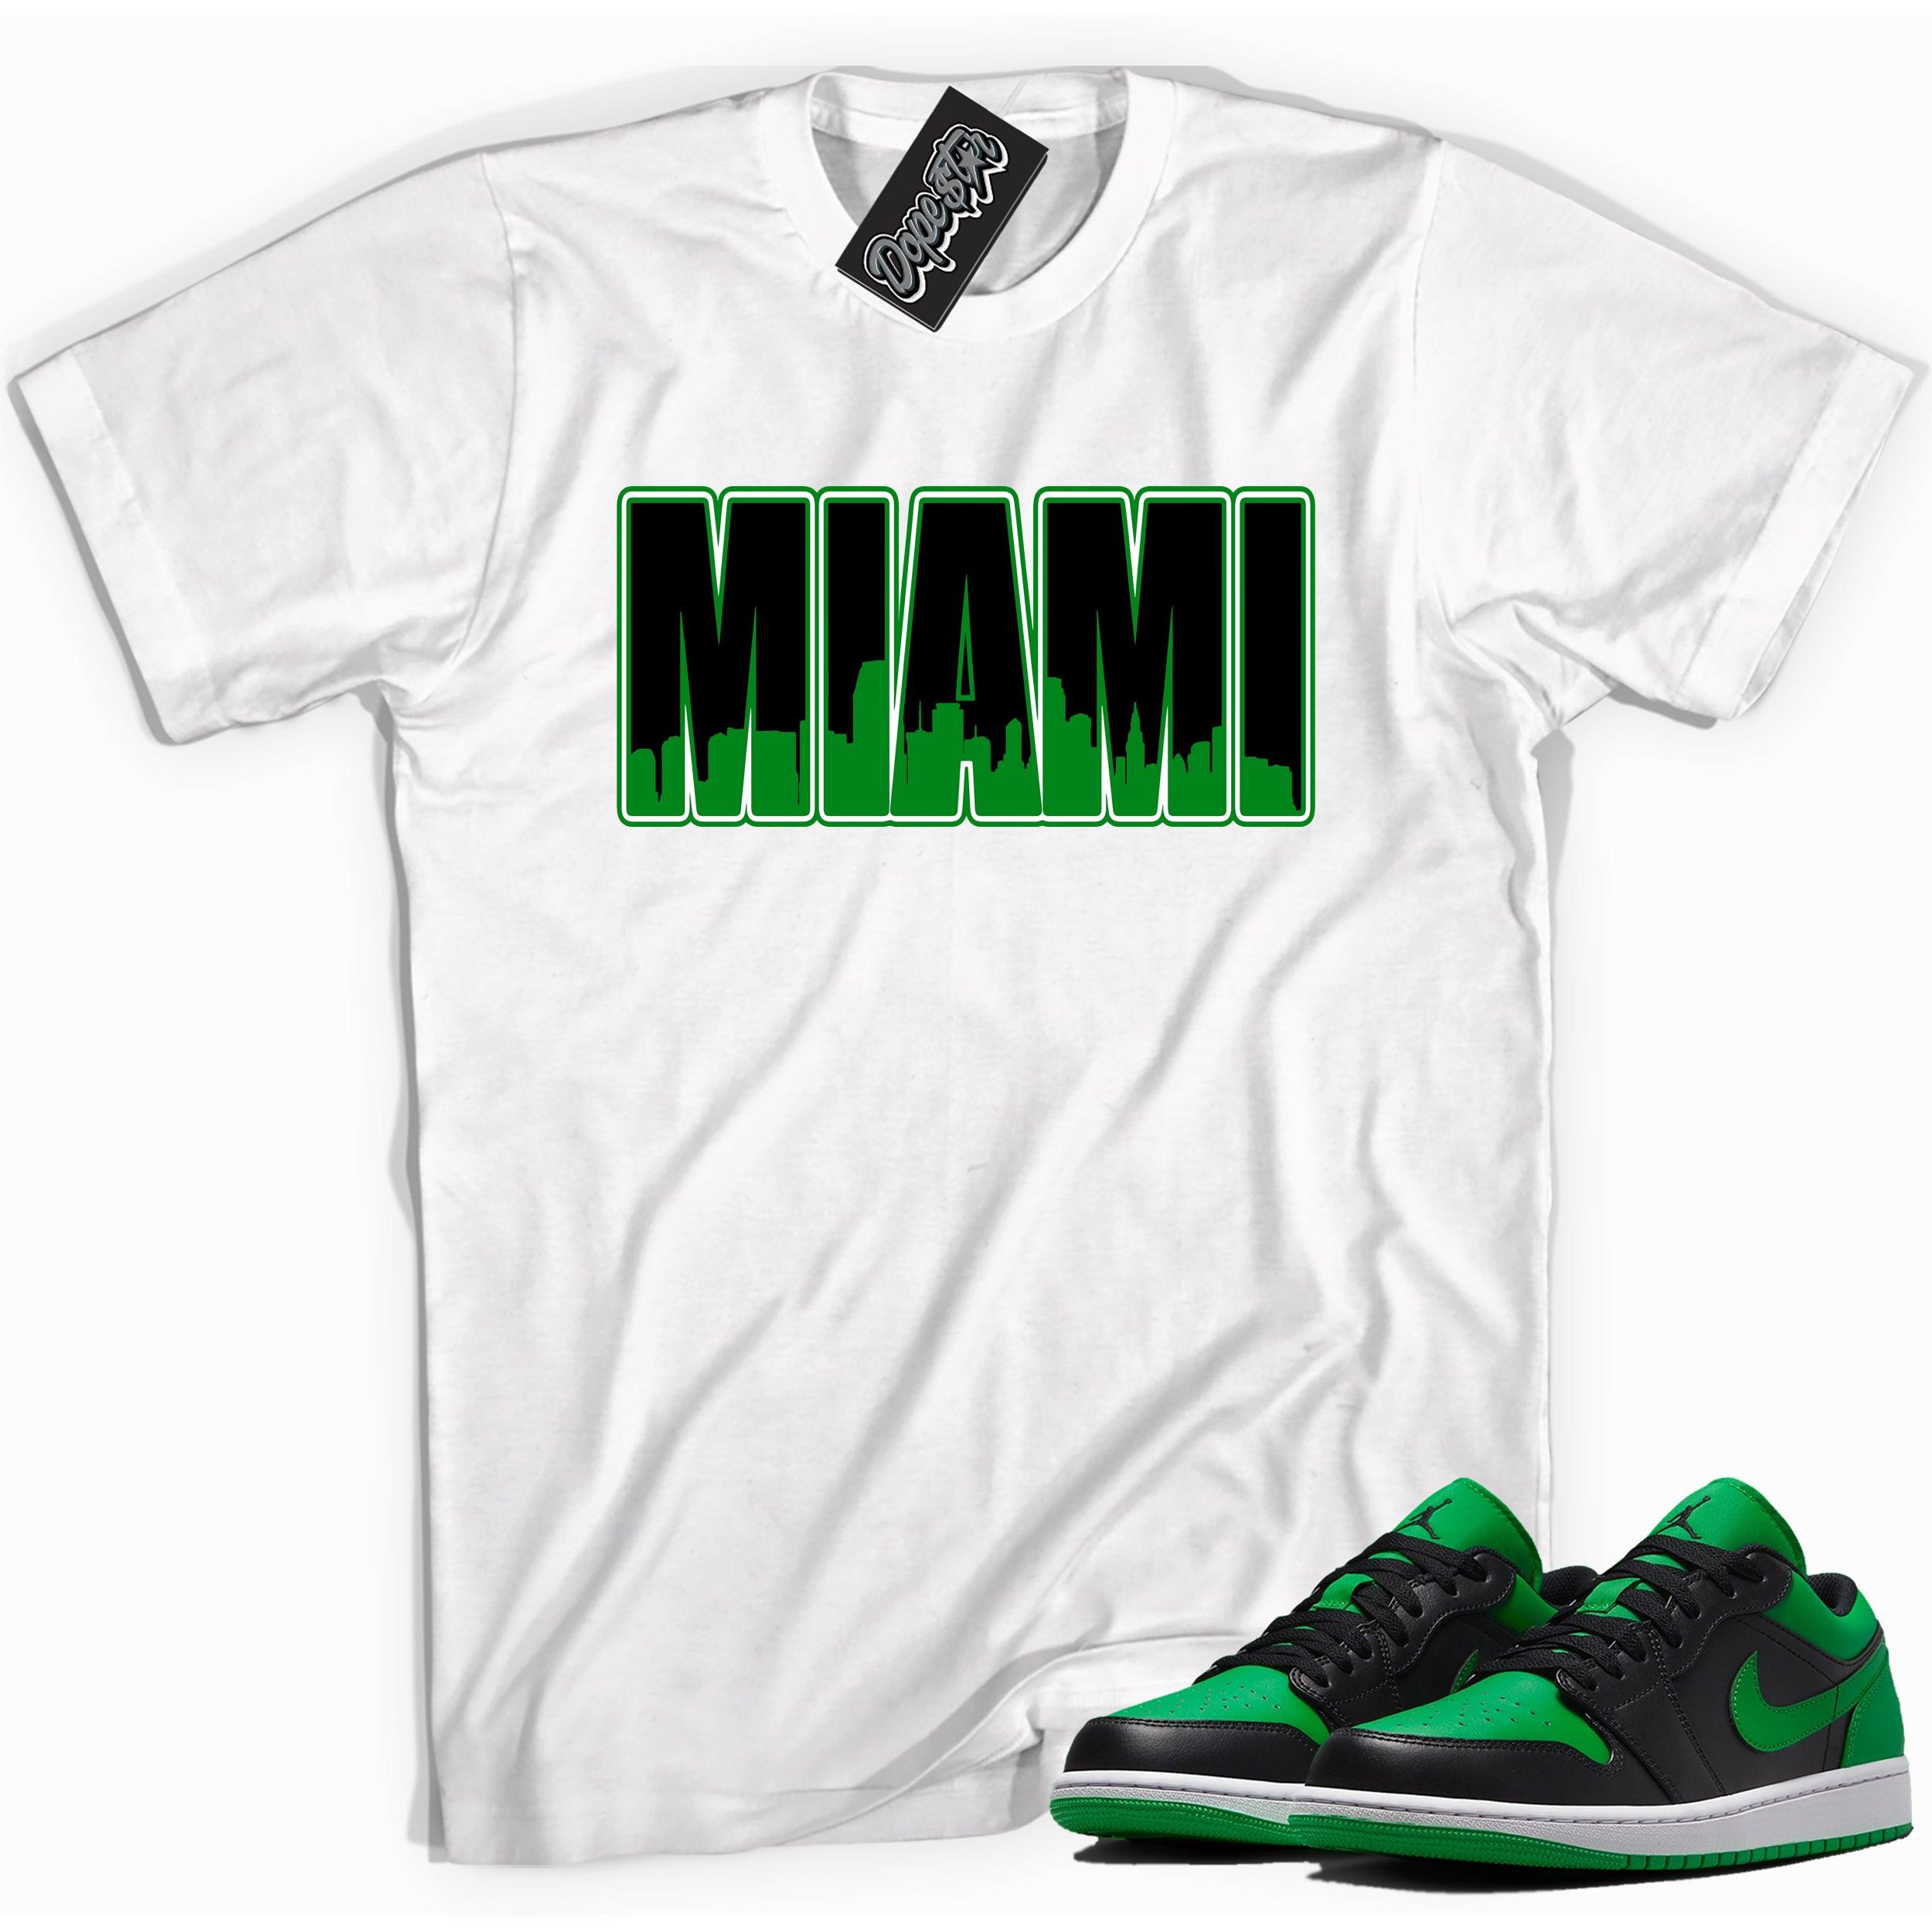 Cool white graphic tee with 'miami' print, that perfectly matches Air Jordan 1 Low Lucky Green sneakers